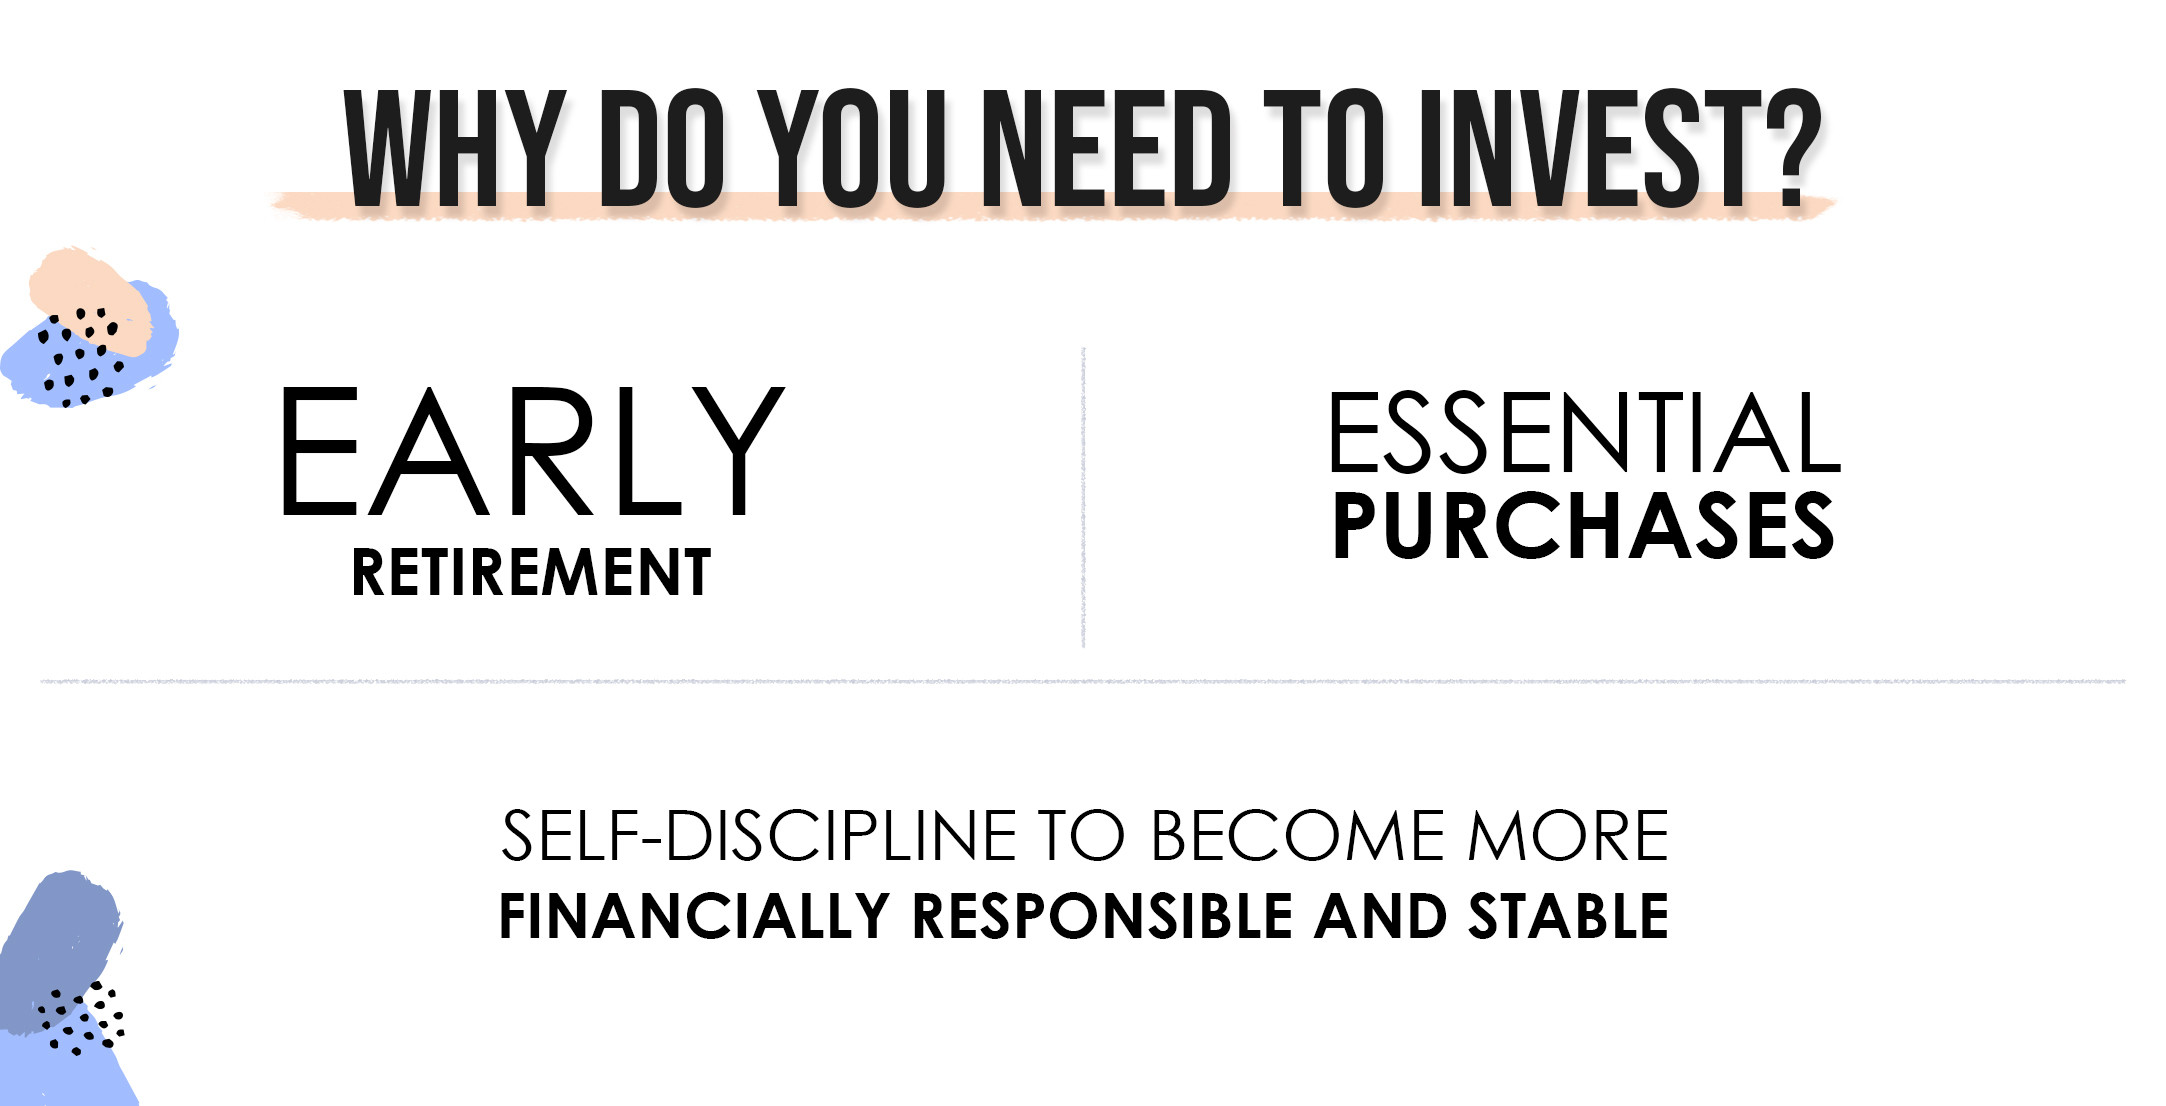 Why Do You Need to Invest?